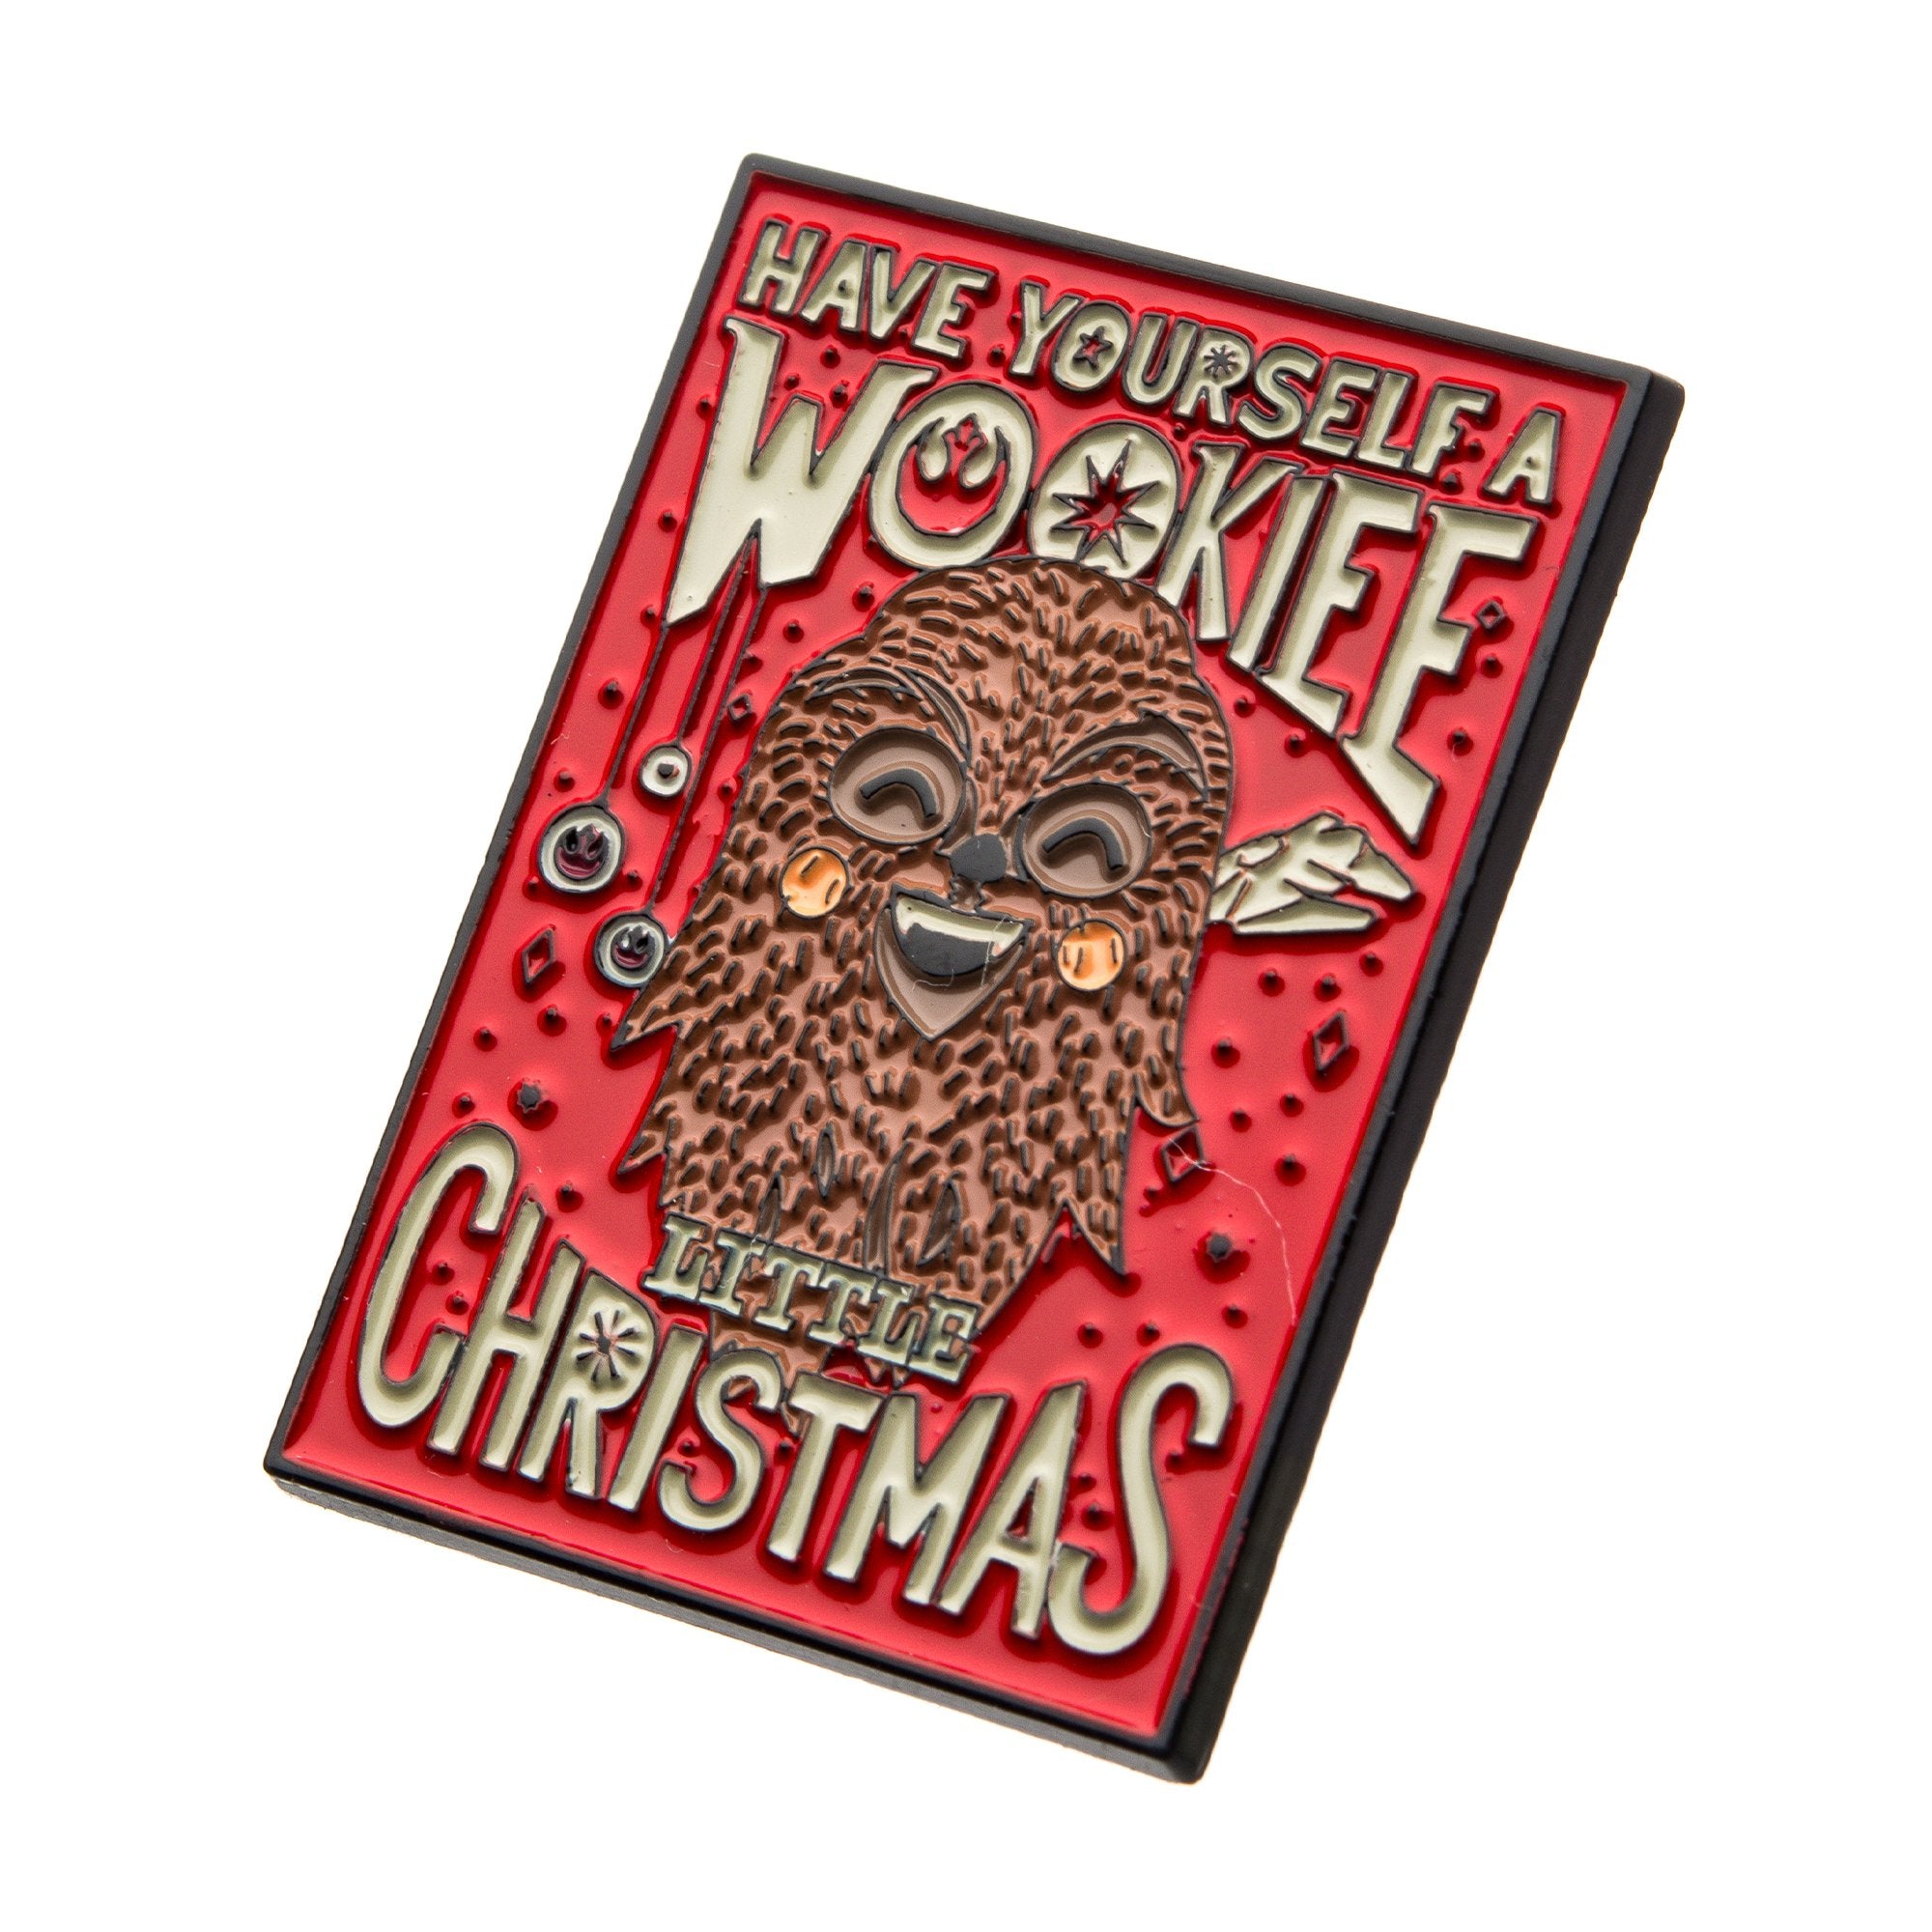 Star Wars "Have yourself a Wookie Little Christmas" Lapel Pin